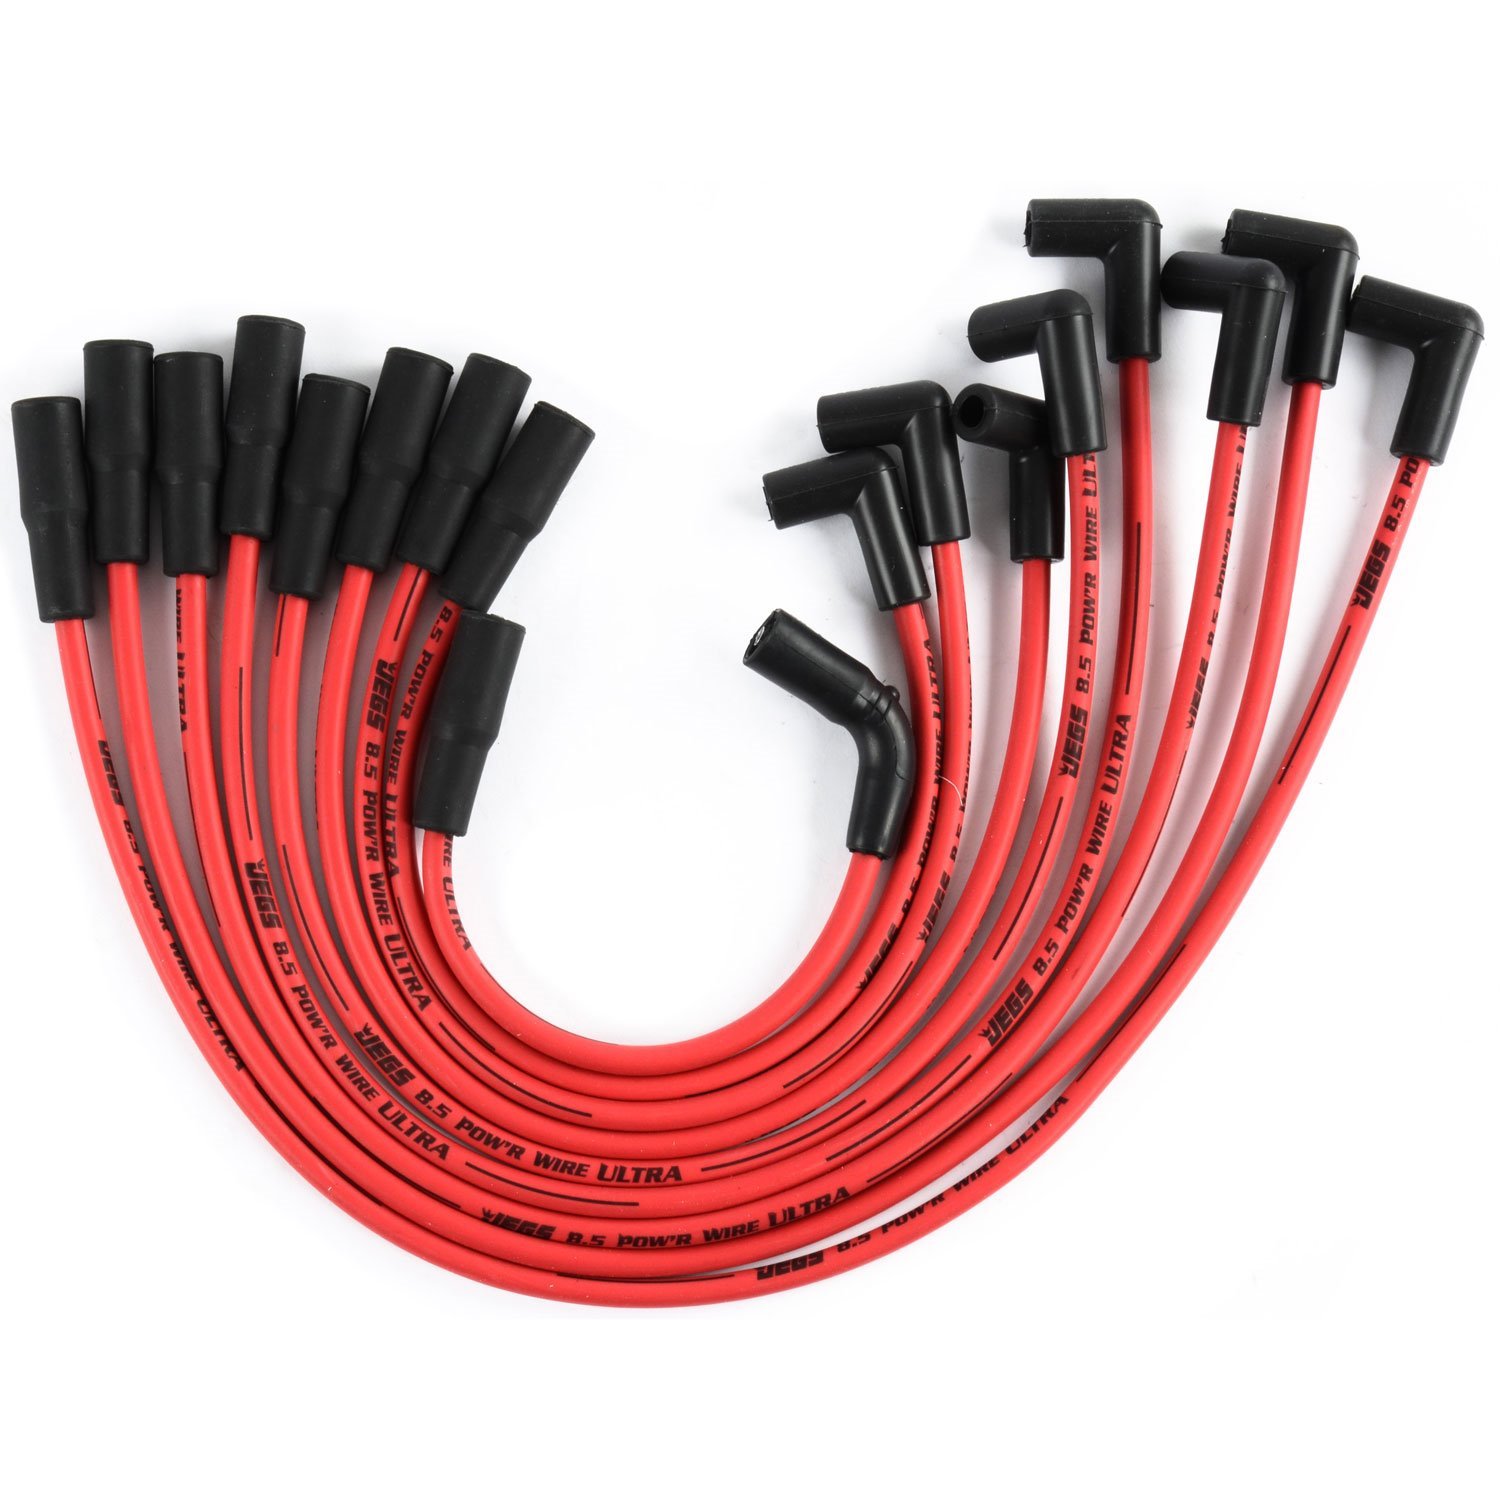 8.5mm Red Ultra Pow'r Wires for 1996-2000 GM Small Block Chevy Truck Vortec 5.7L